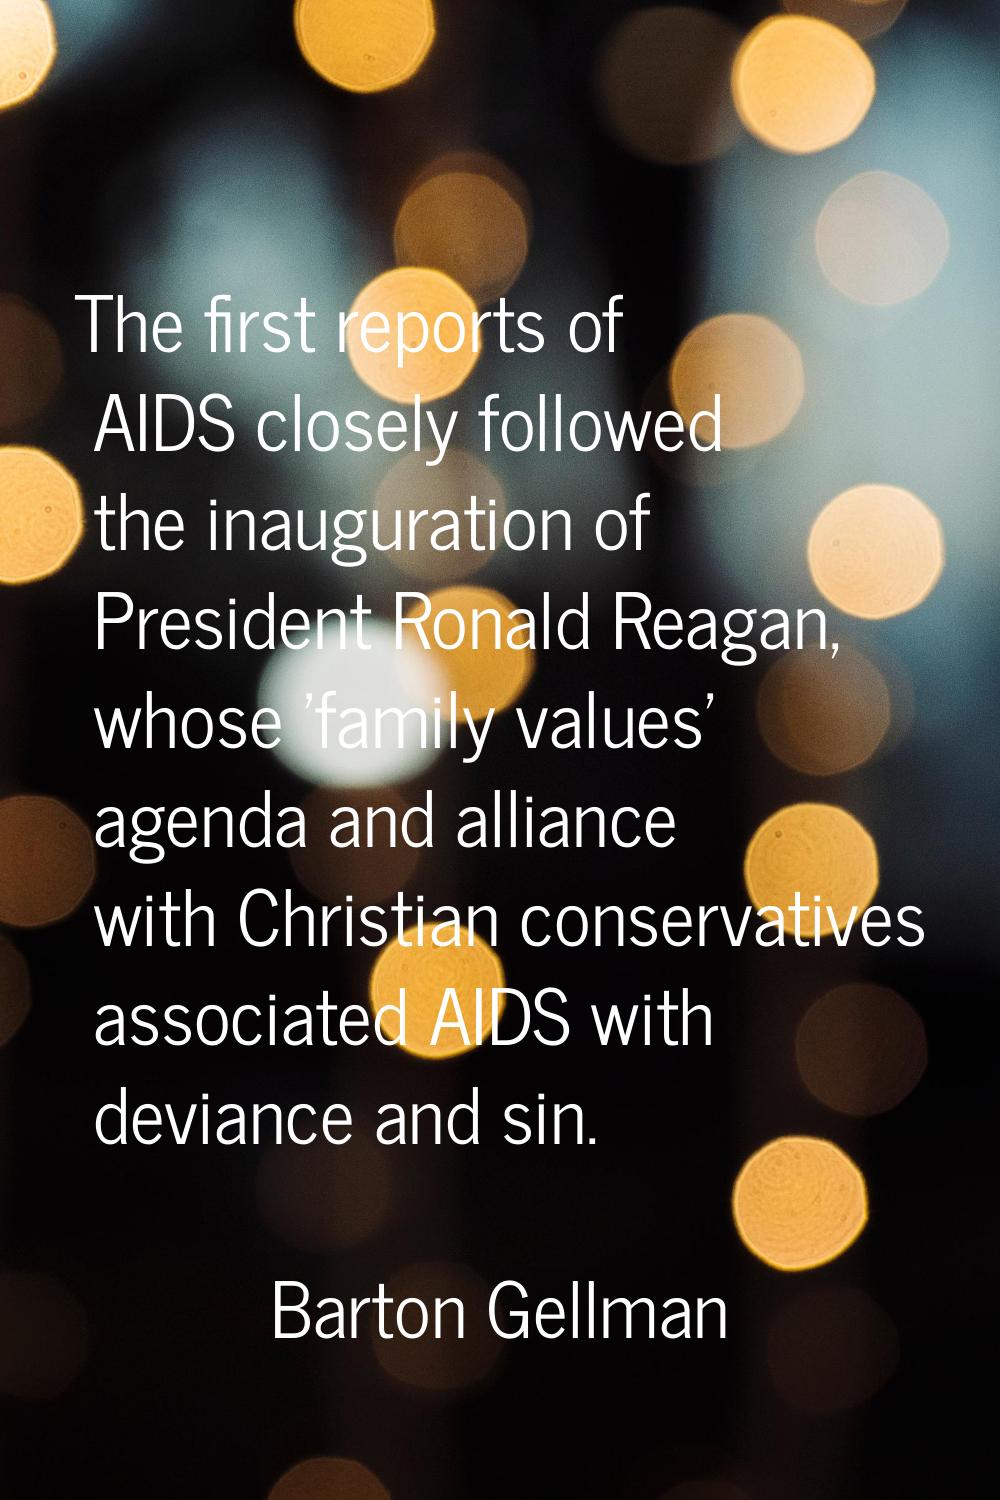 The first reports of AIDS closely followed the inauguration of President Ronald Reagan, whose 'fami